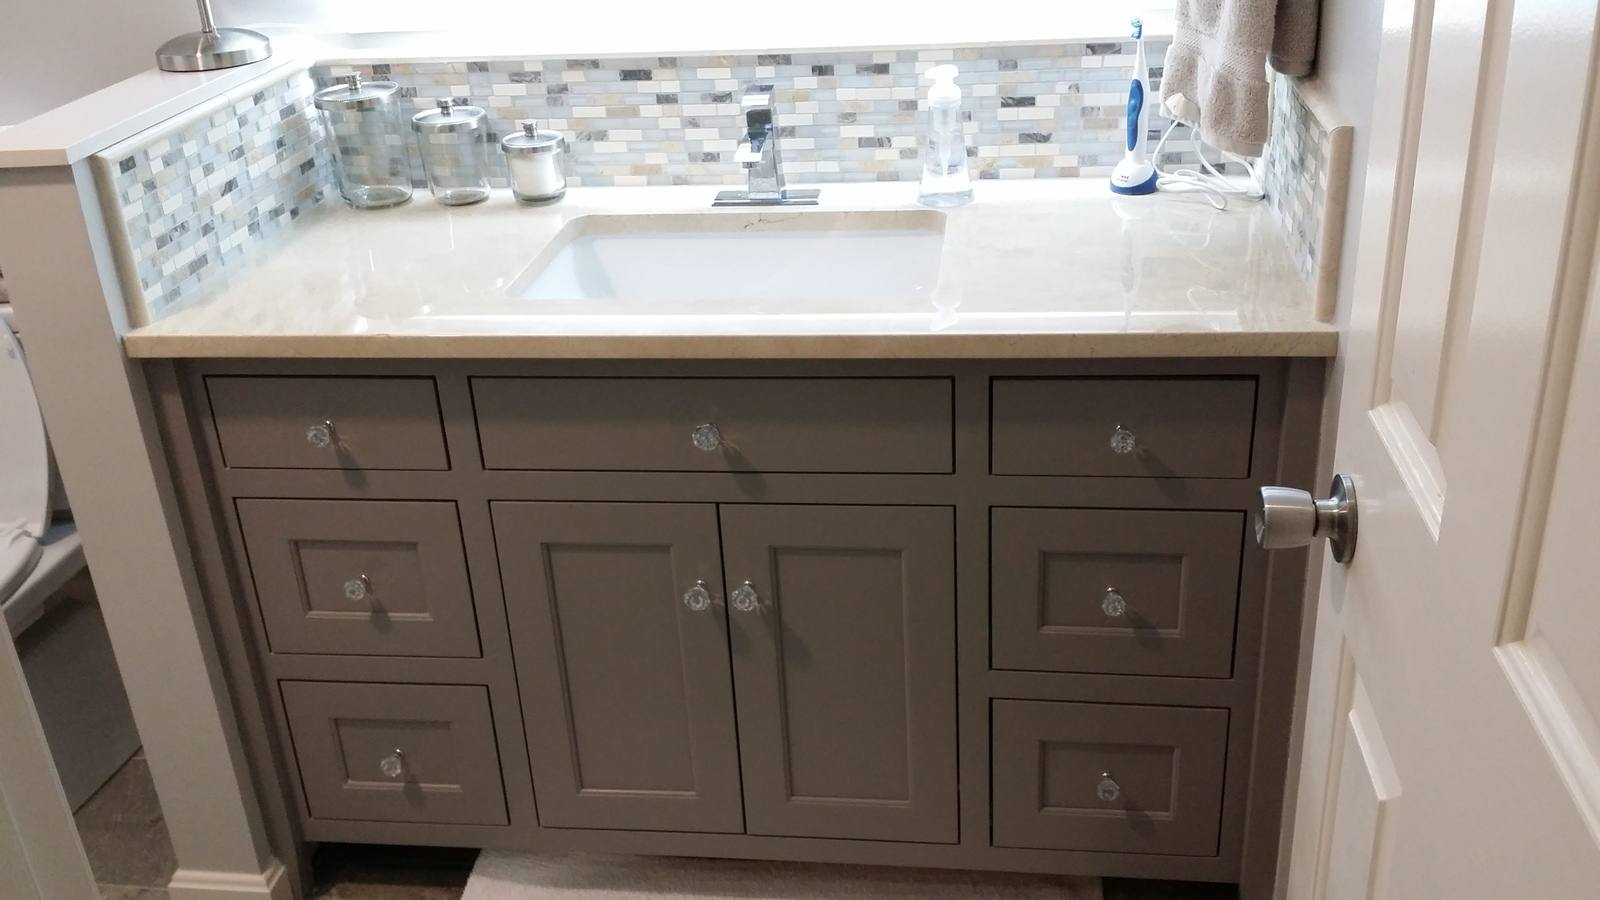 Bathroom vanity with shaker cabinets and knob pulls